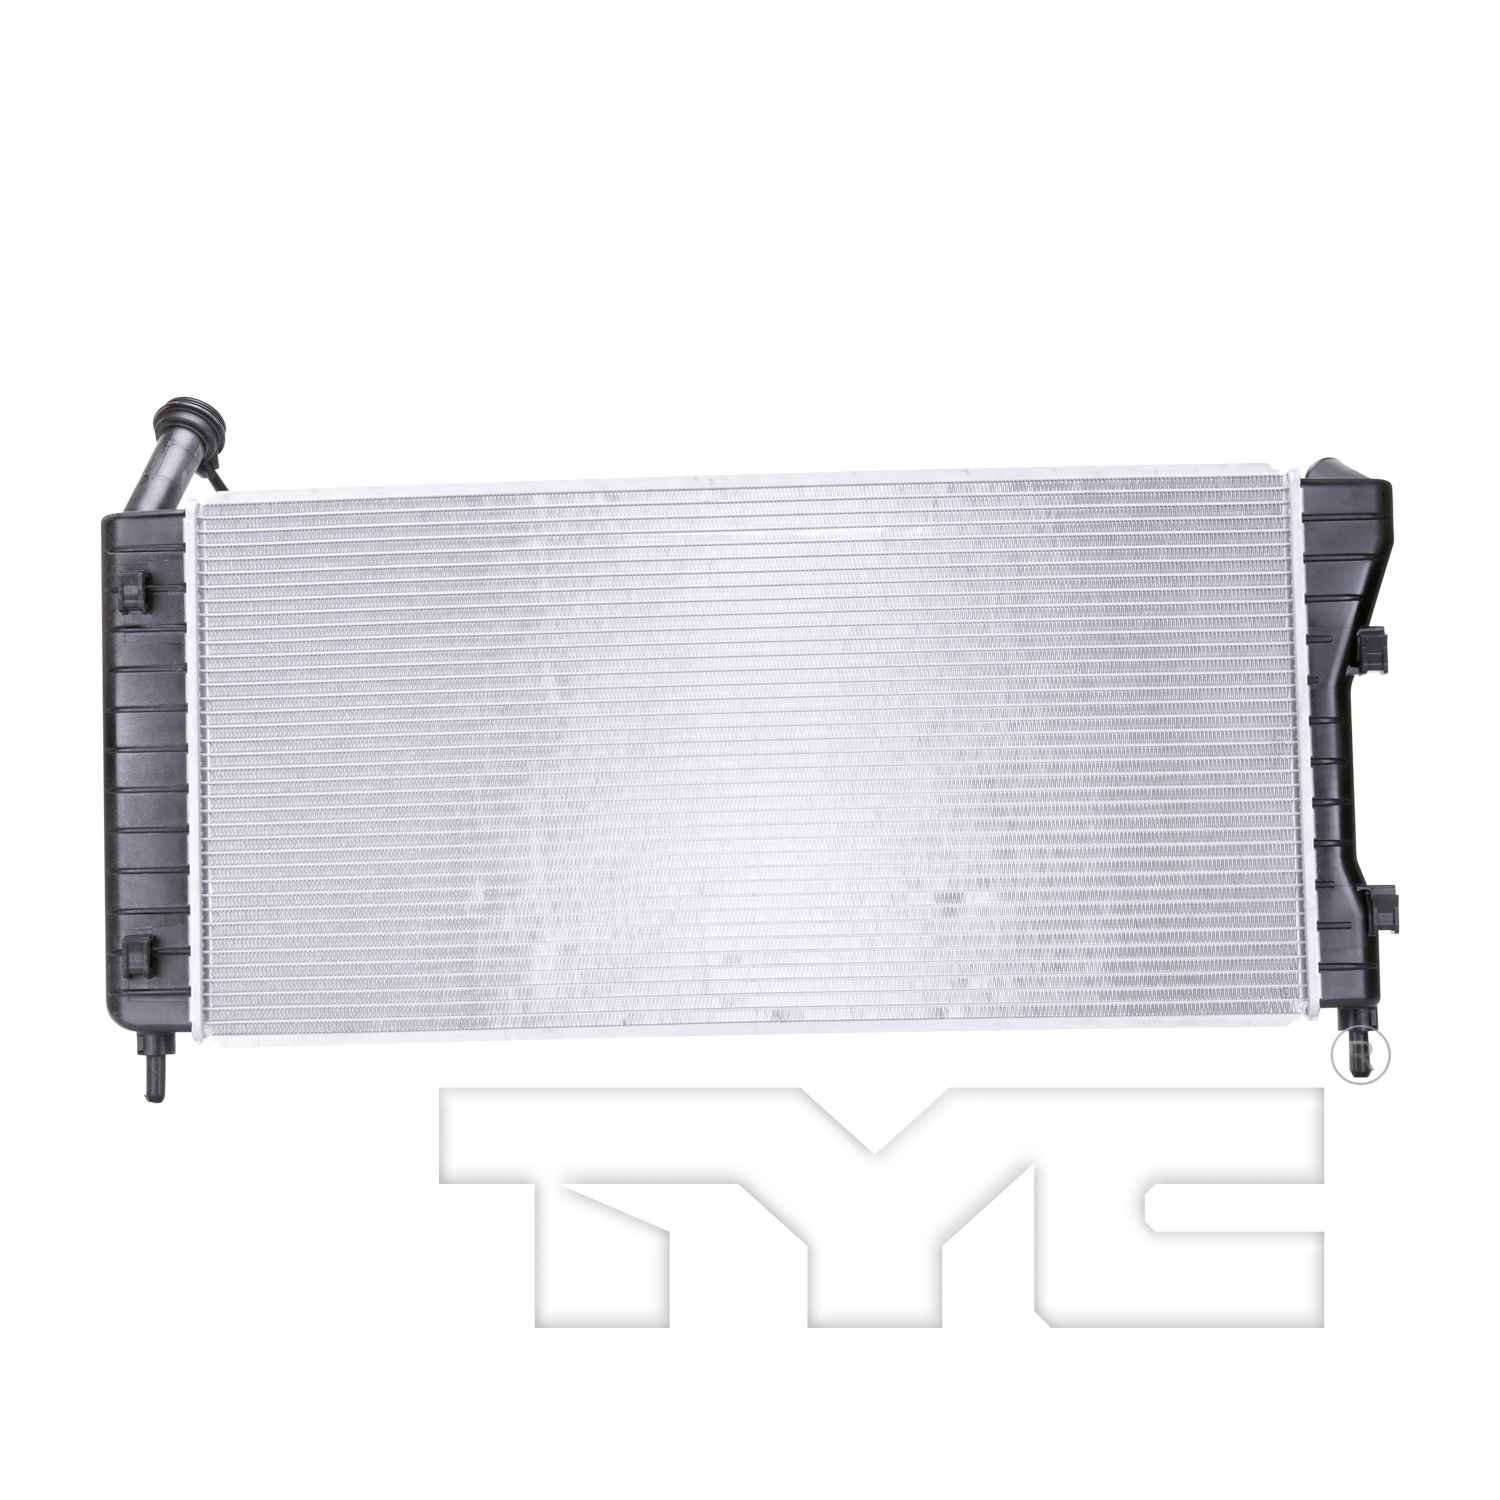 Aftermarket RADIATORS for CHEVROLET - MONTE CARLO, MONTE CARLO,04-05,Radiator assembly